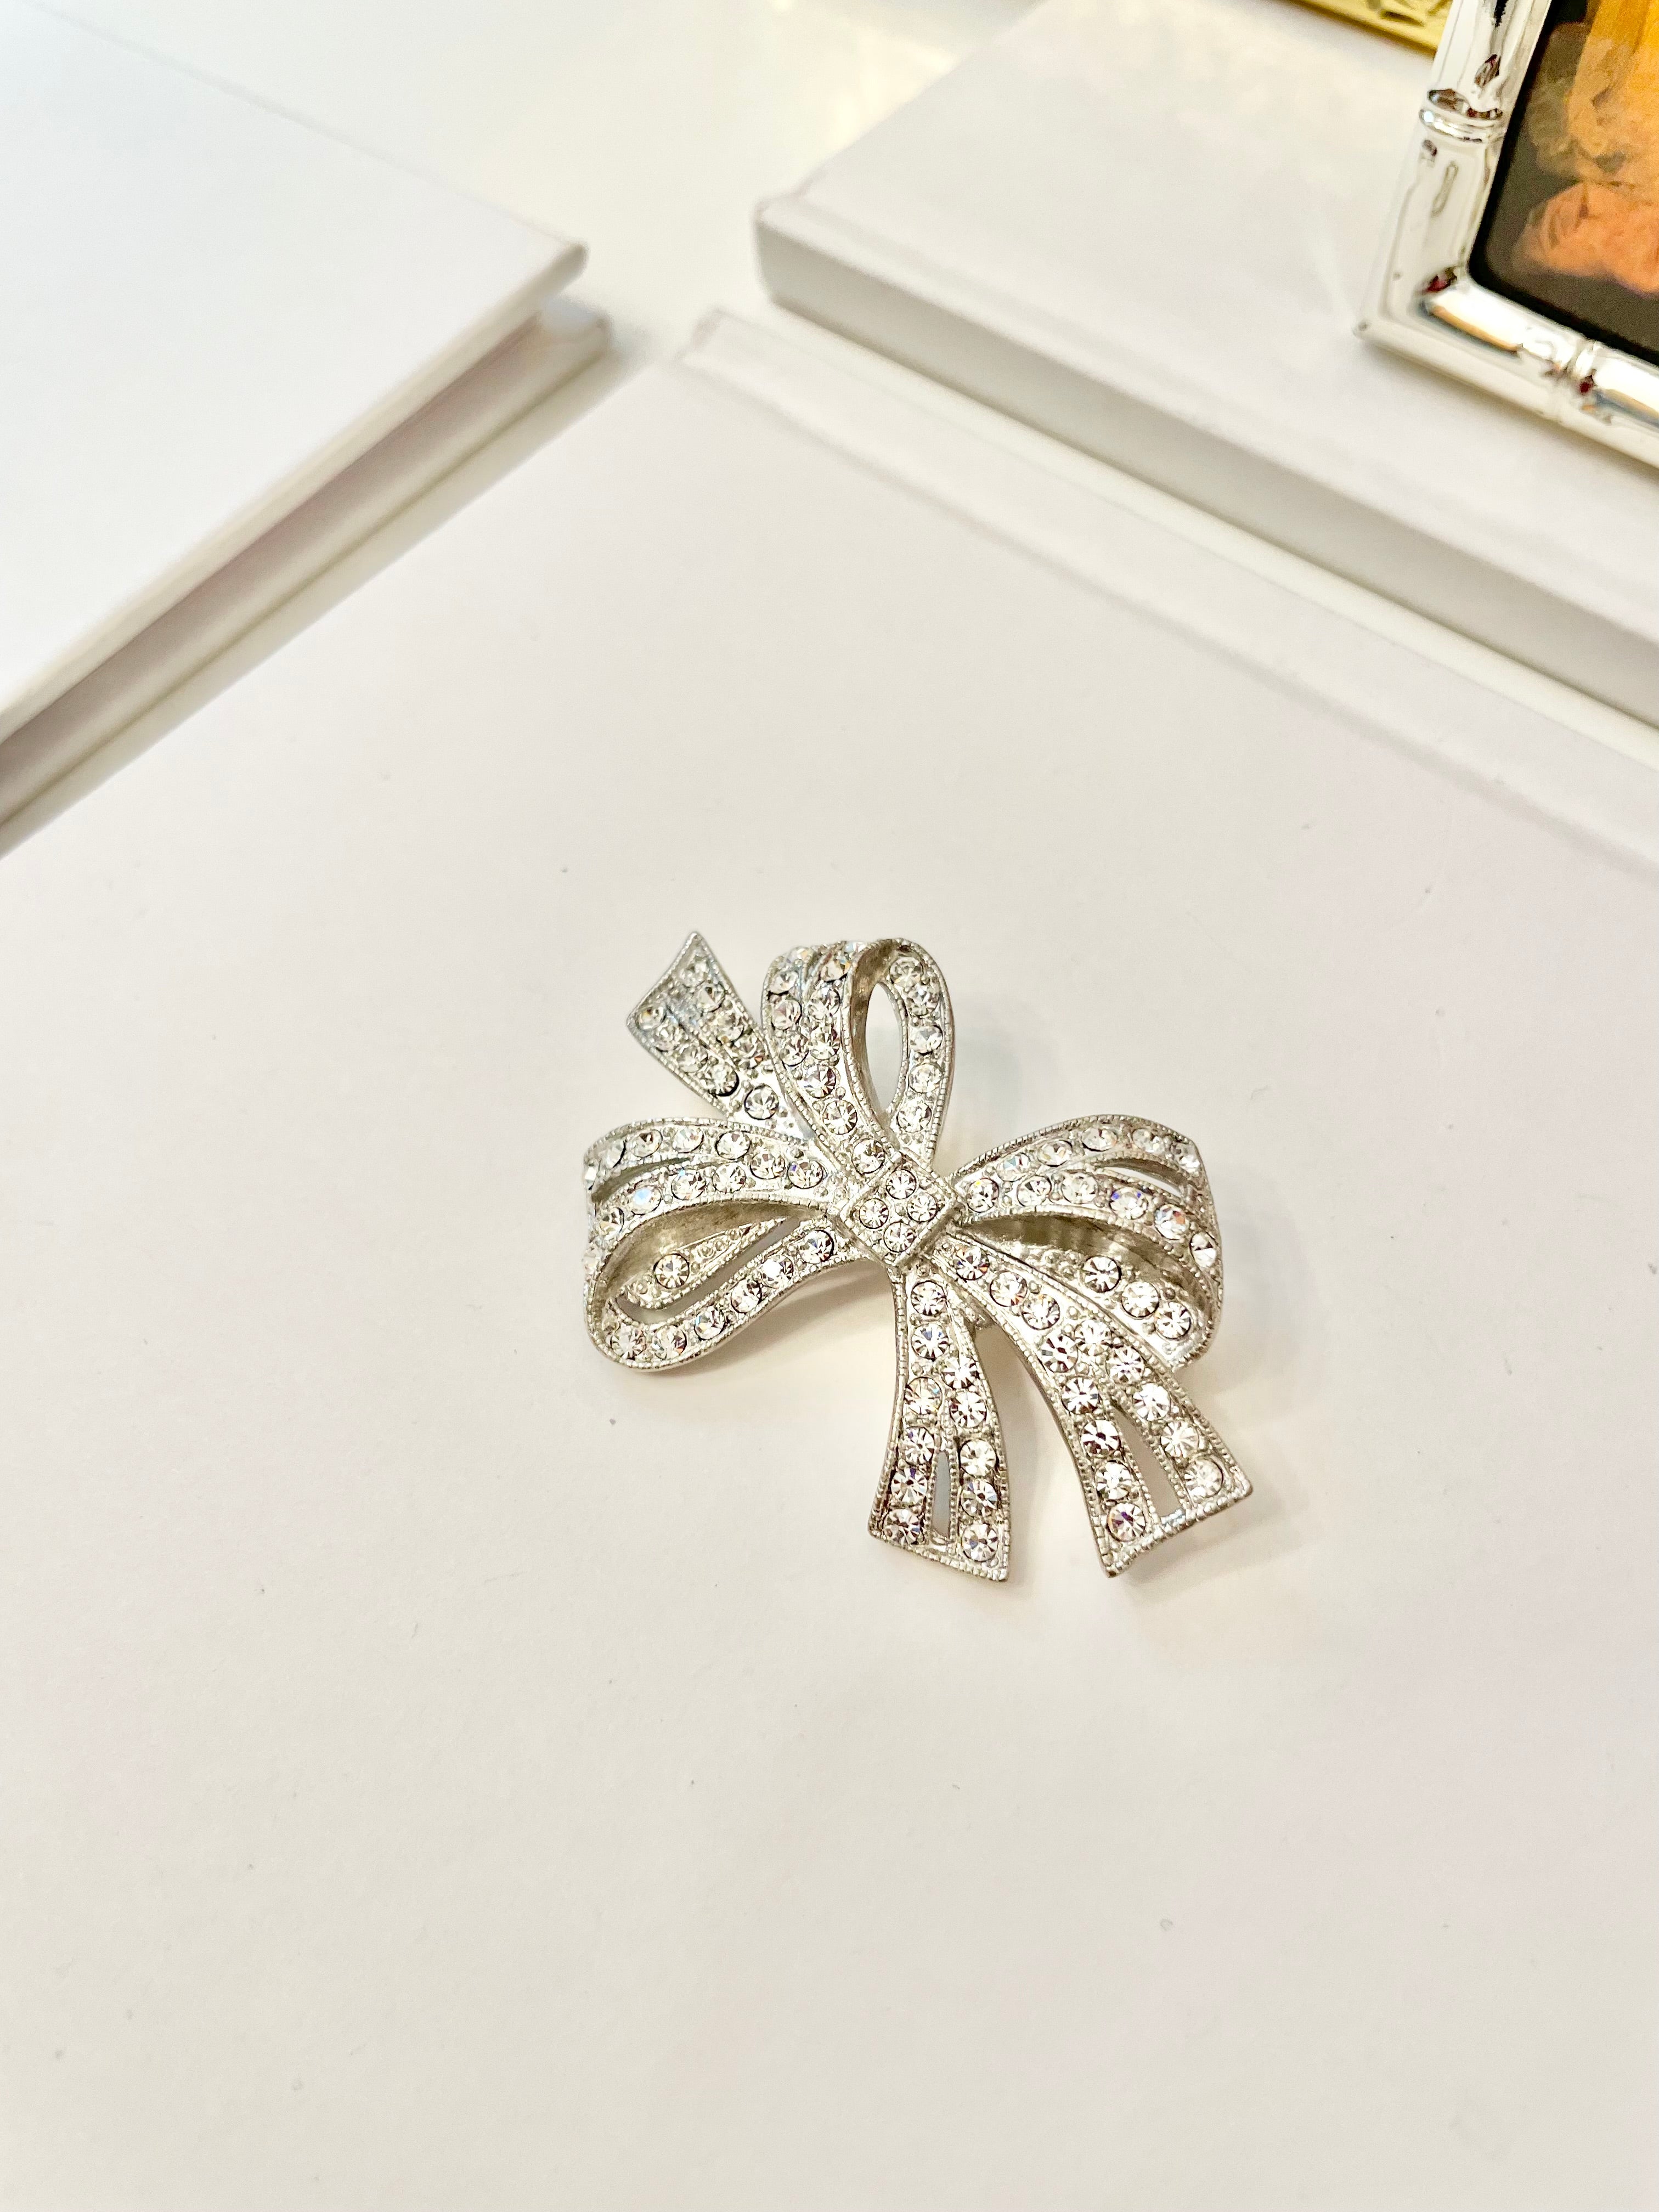 The most elegant silver bow.... so lovely